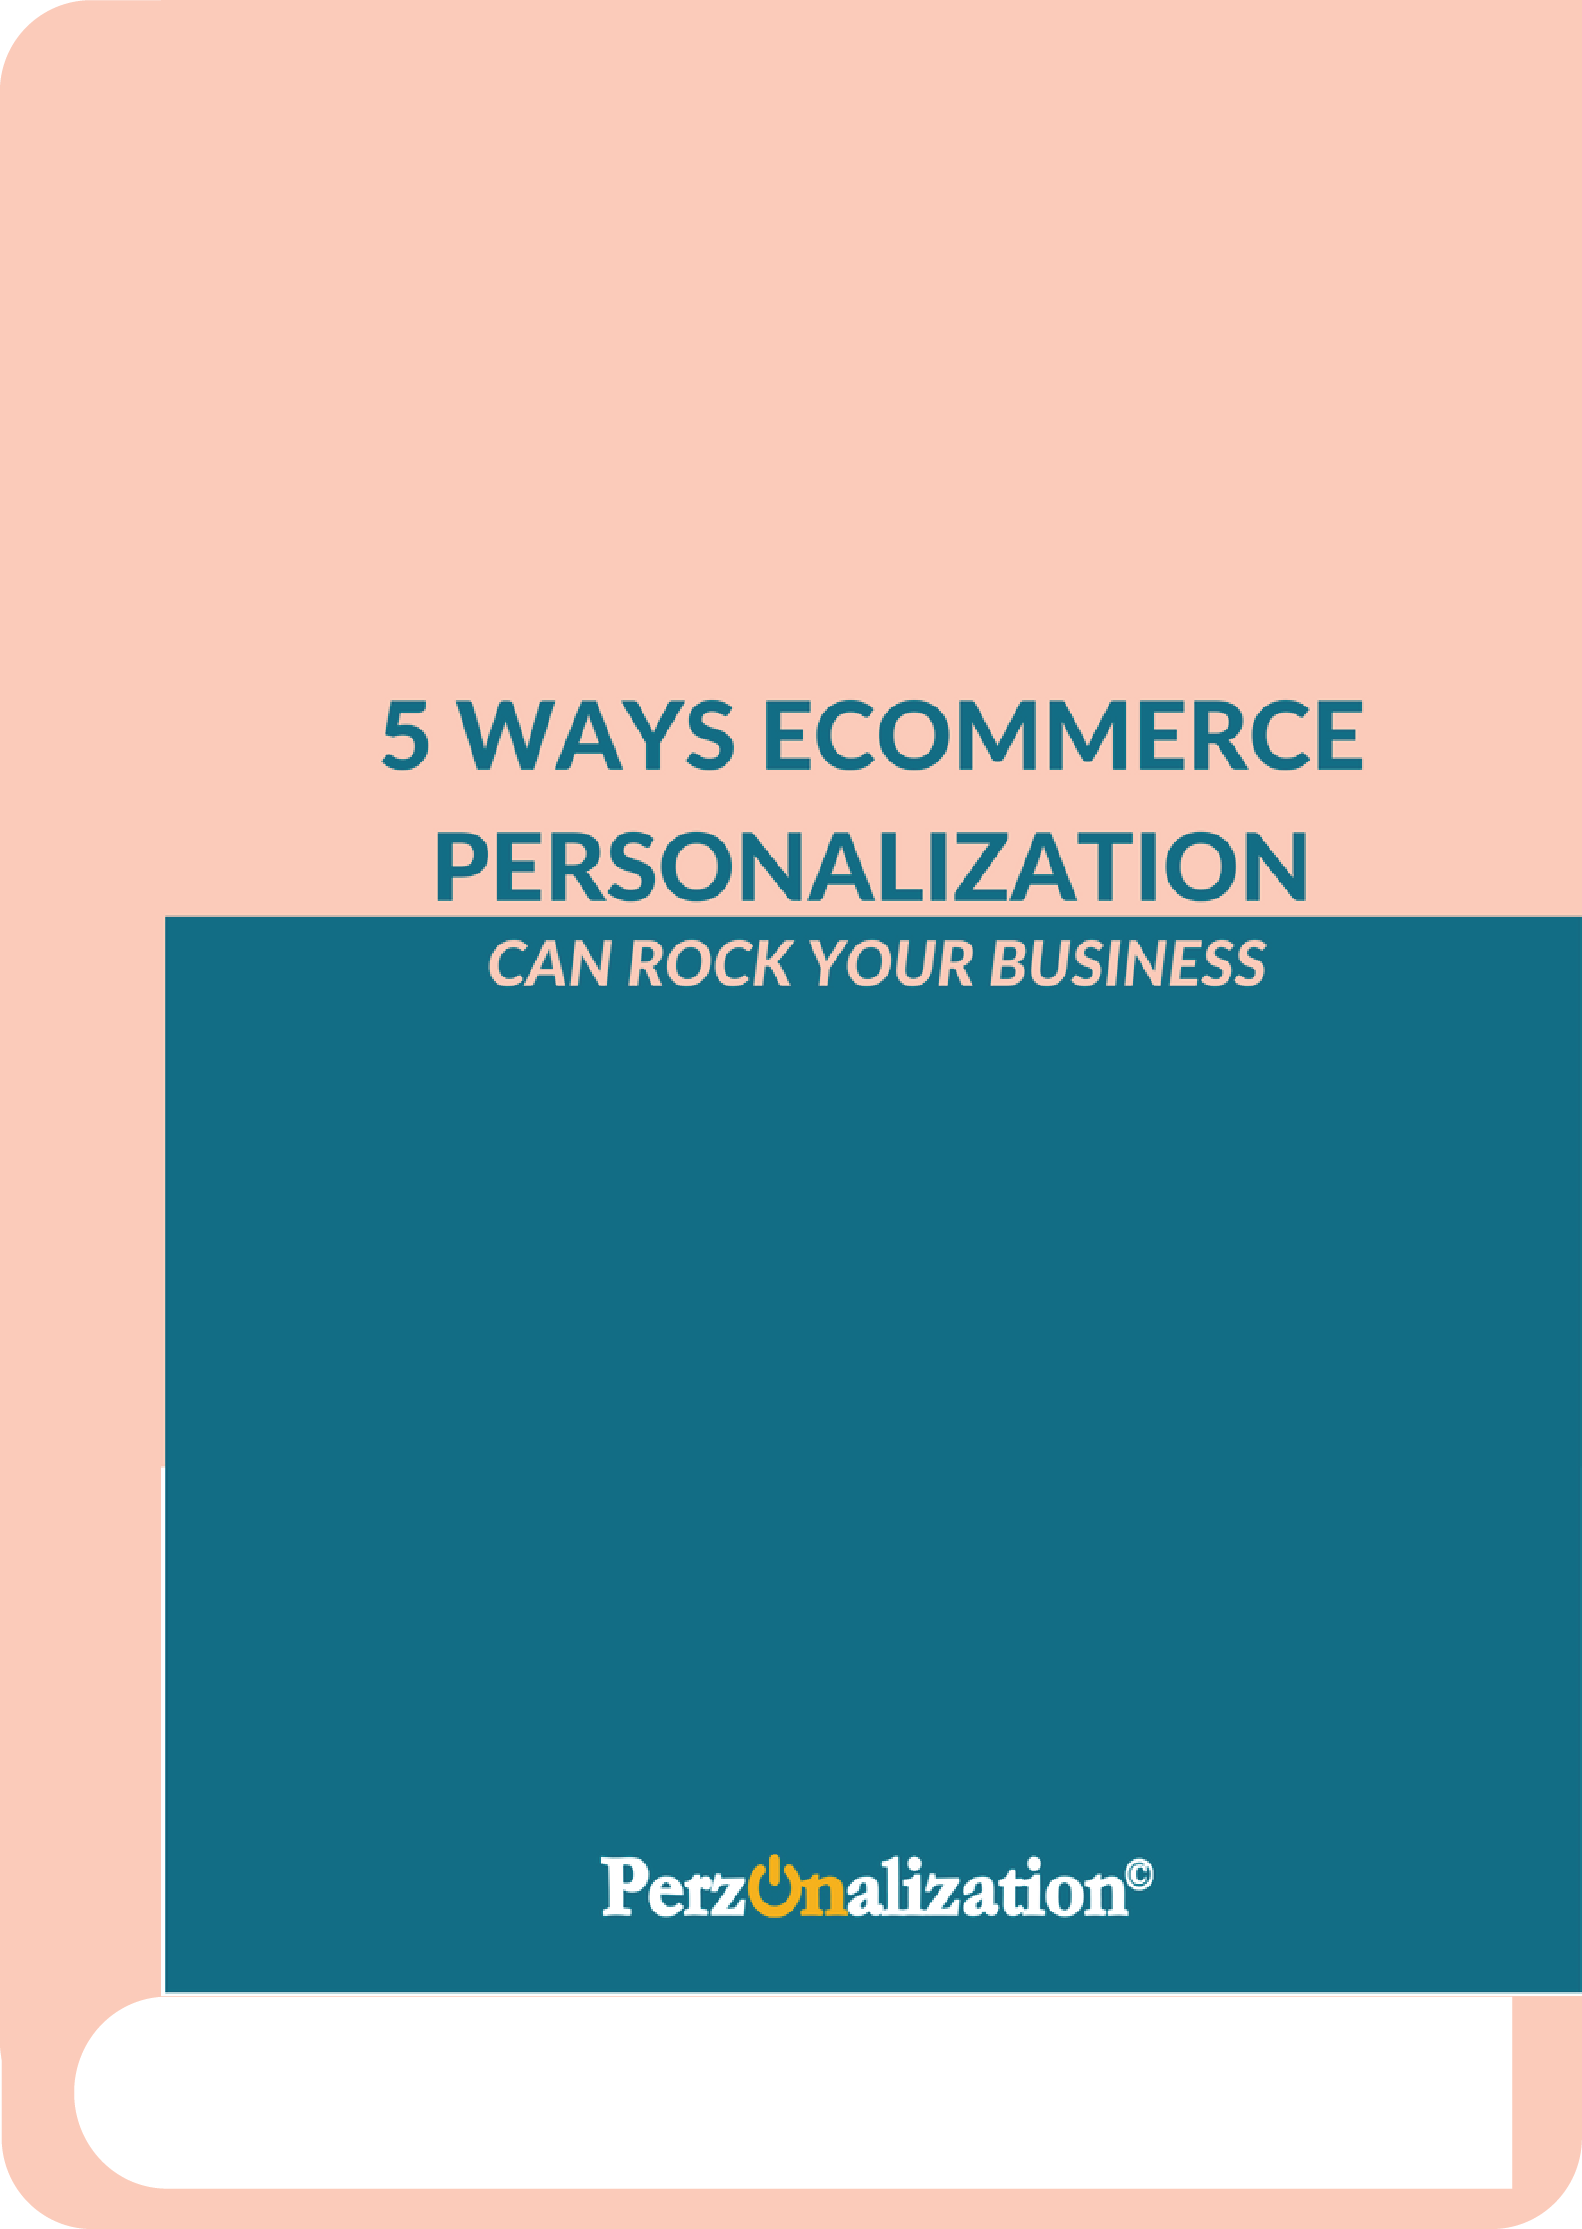 It is possible to create a rich and more relevant experience that will drive conversions and business outcomes via predictive personalization. In this eBook, find out how an online retail business can benefit from eCommerce personalization.